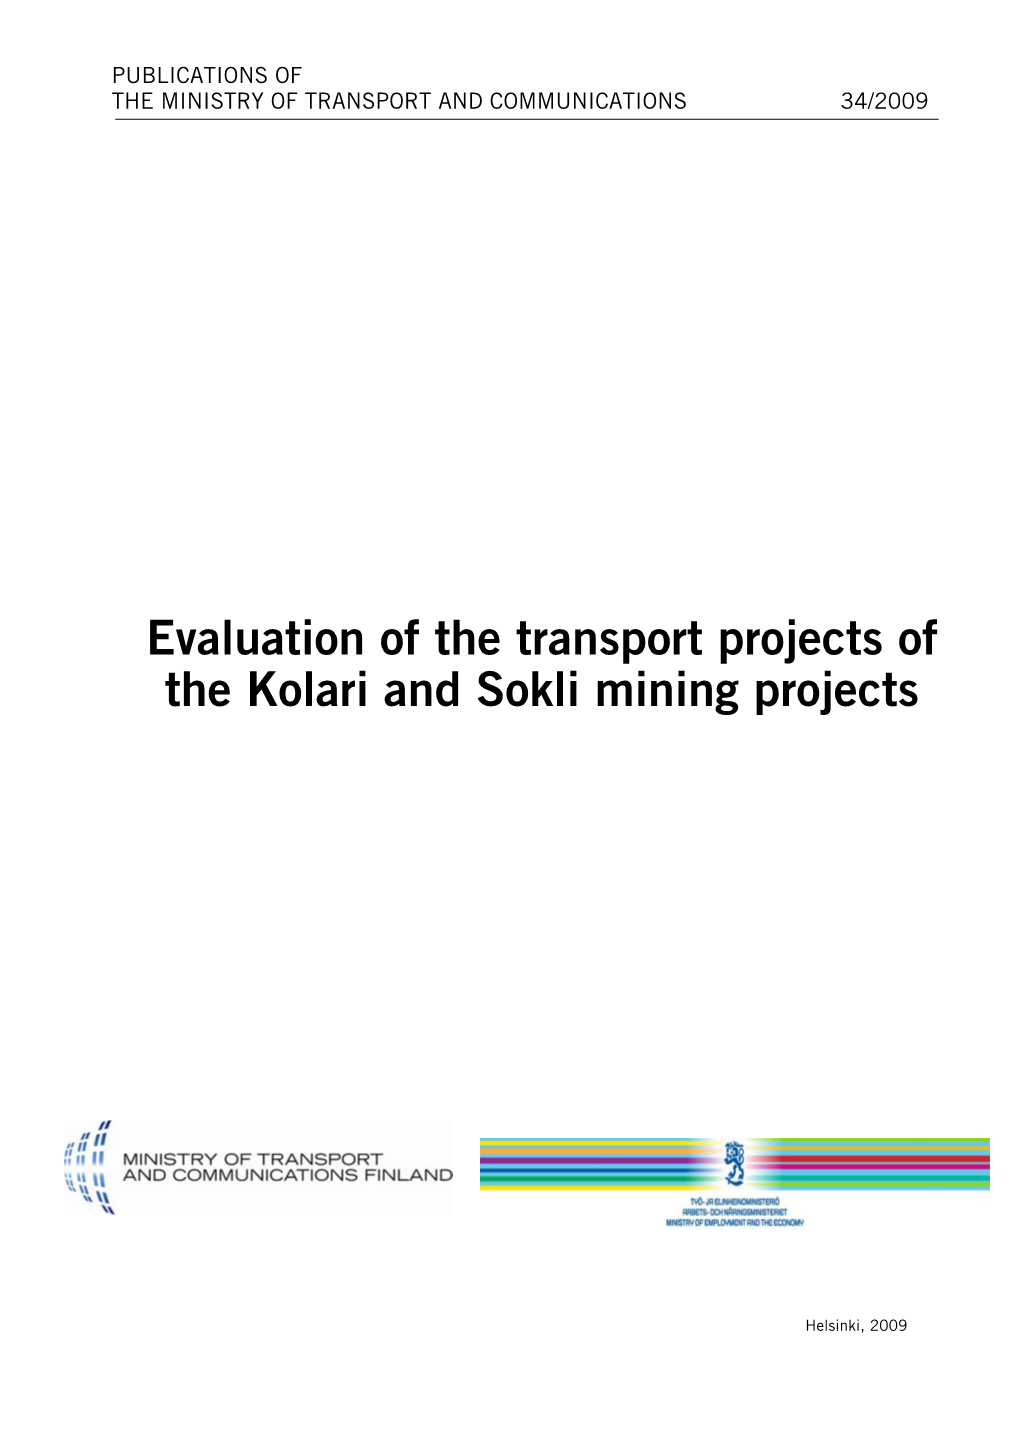 Evaluation of the Transport Projects of the Kolari and Sokli Mining Projects